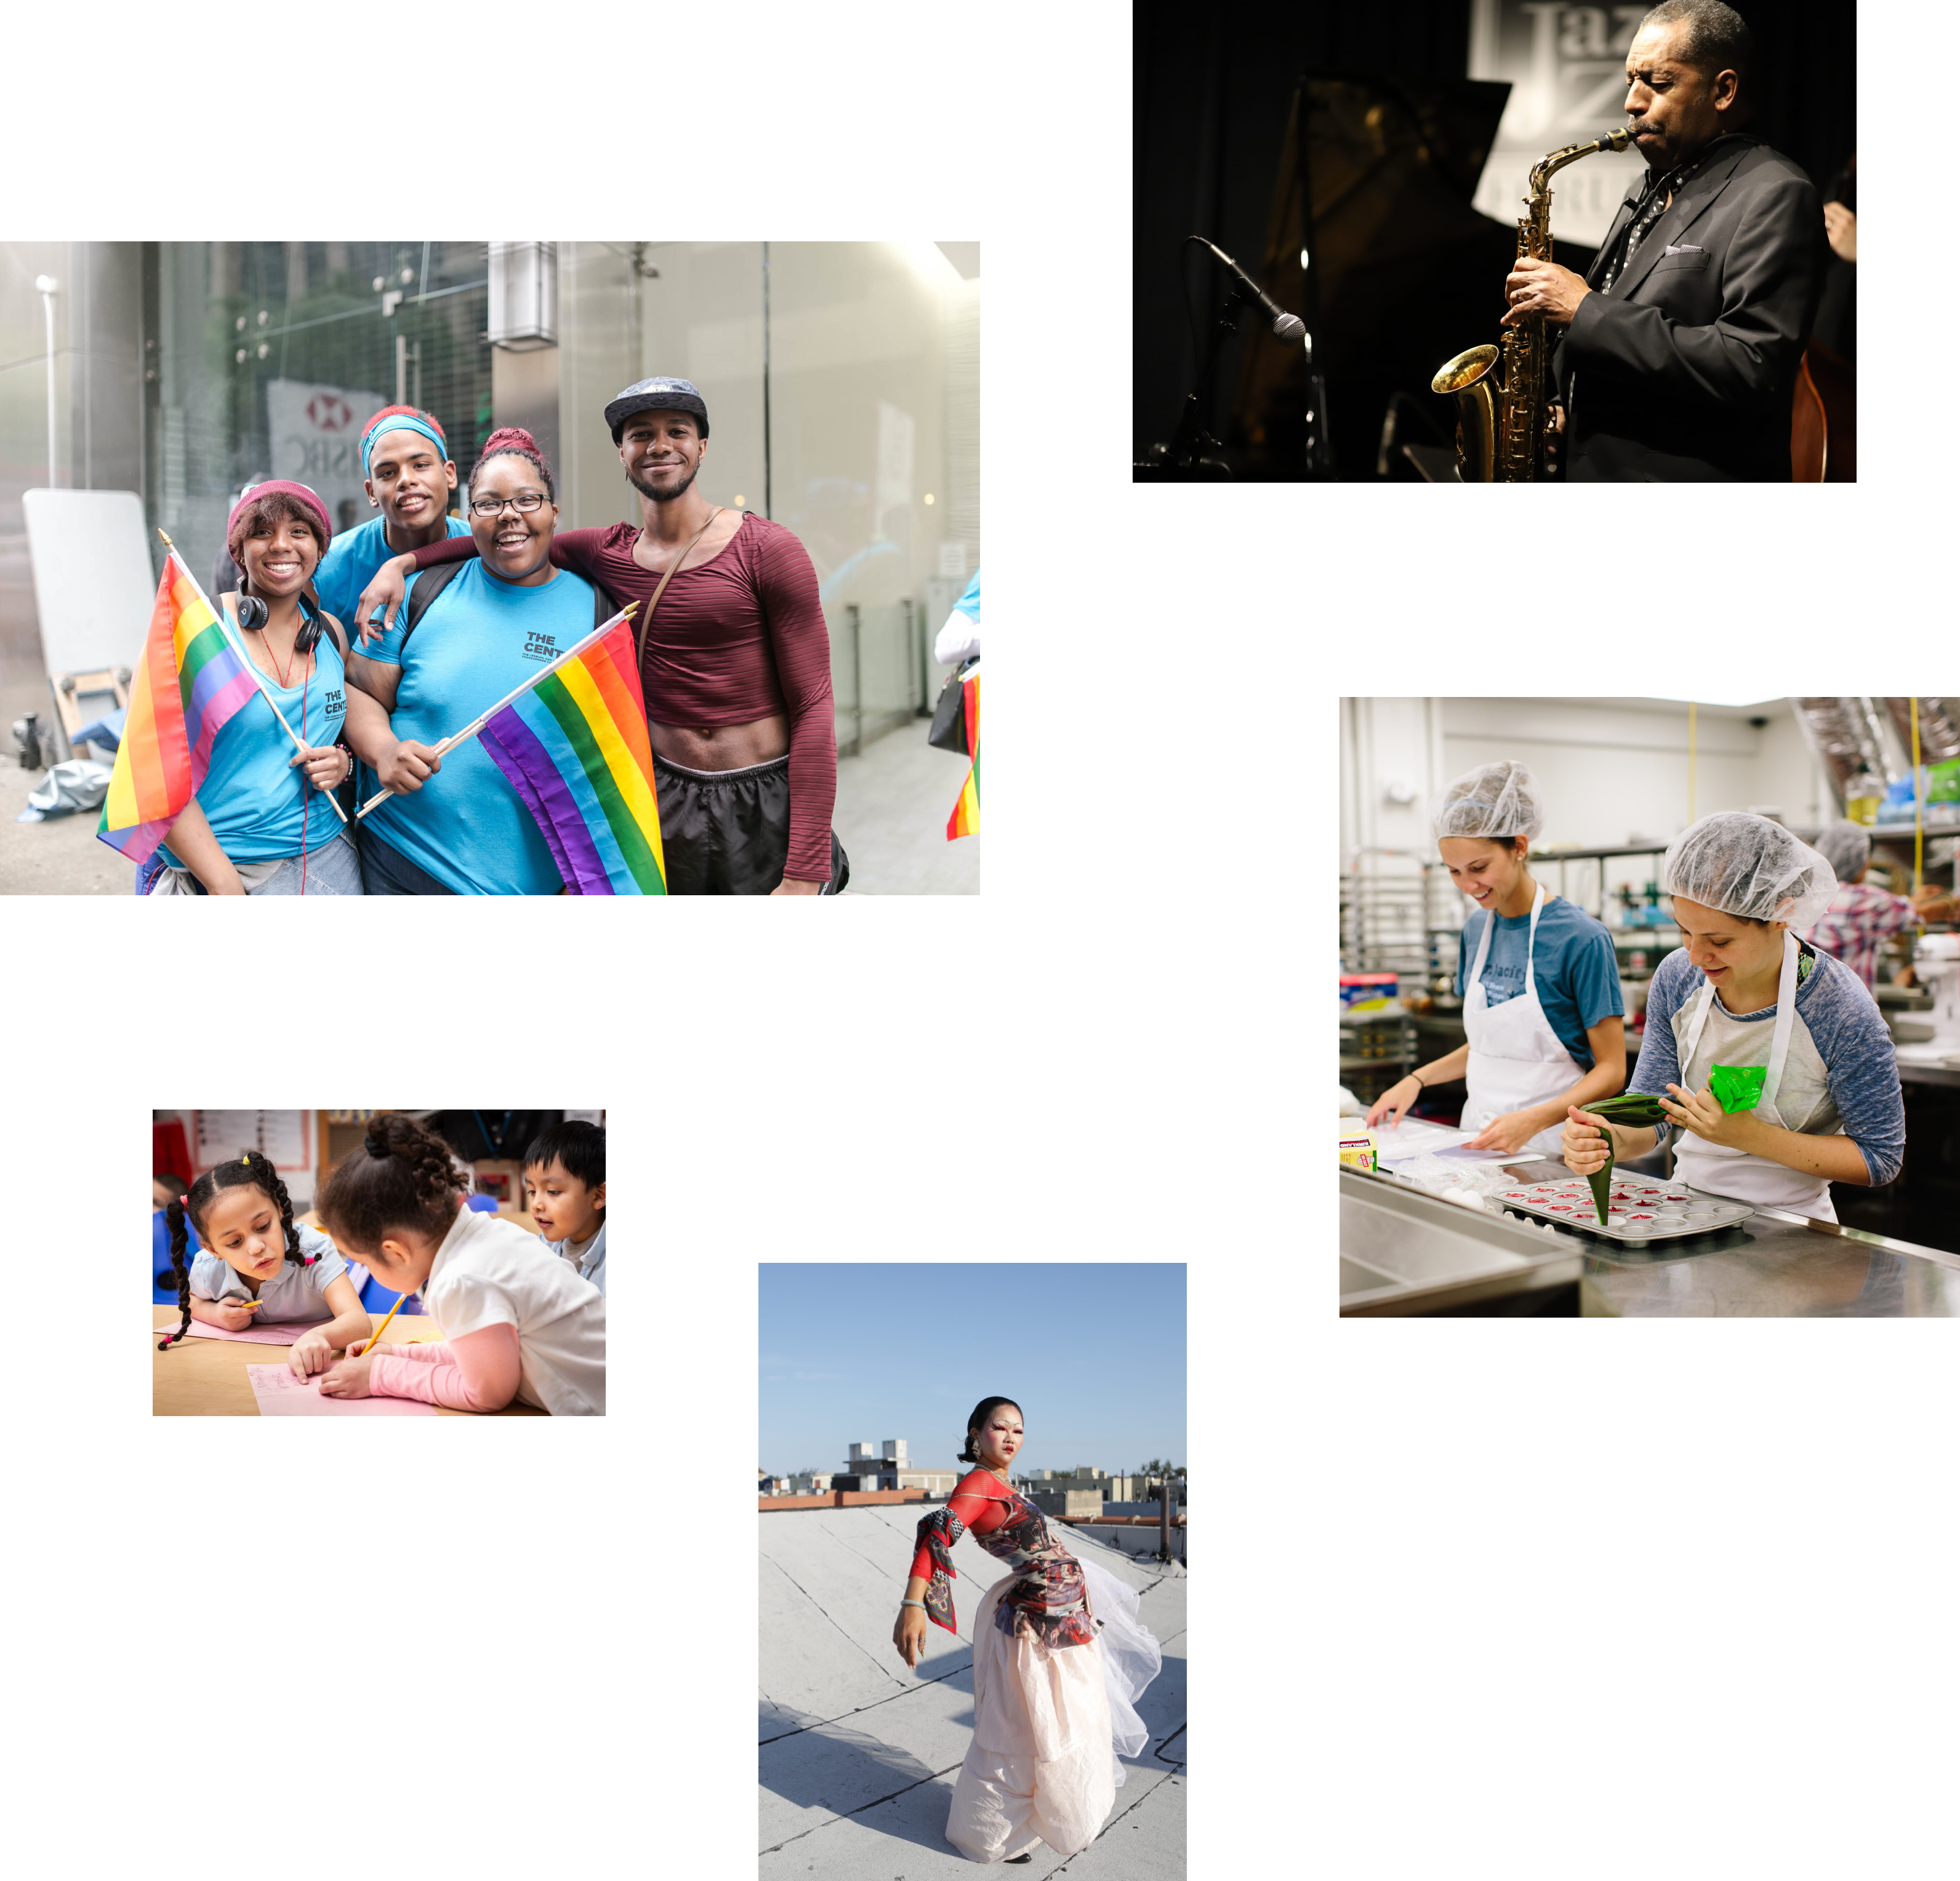 A collage with six images: group of people with rainbow flags, a musician playing the saxophone, people in kitchen uniforms preparing food, a person writing on paper with children, a person wearing a flowing outfit standing on a rooftop, and a person in a blue shirt and jeans.